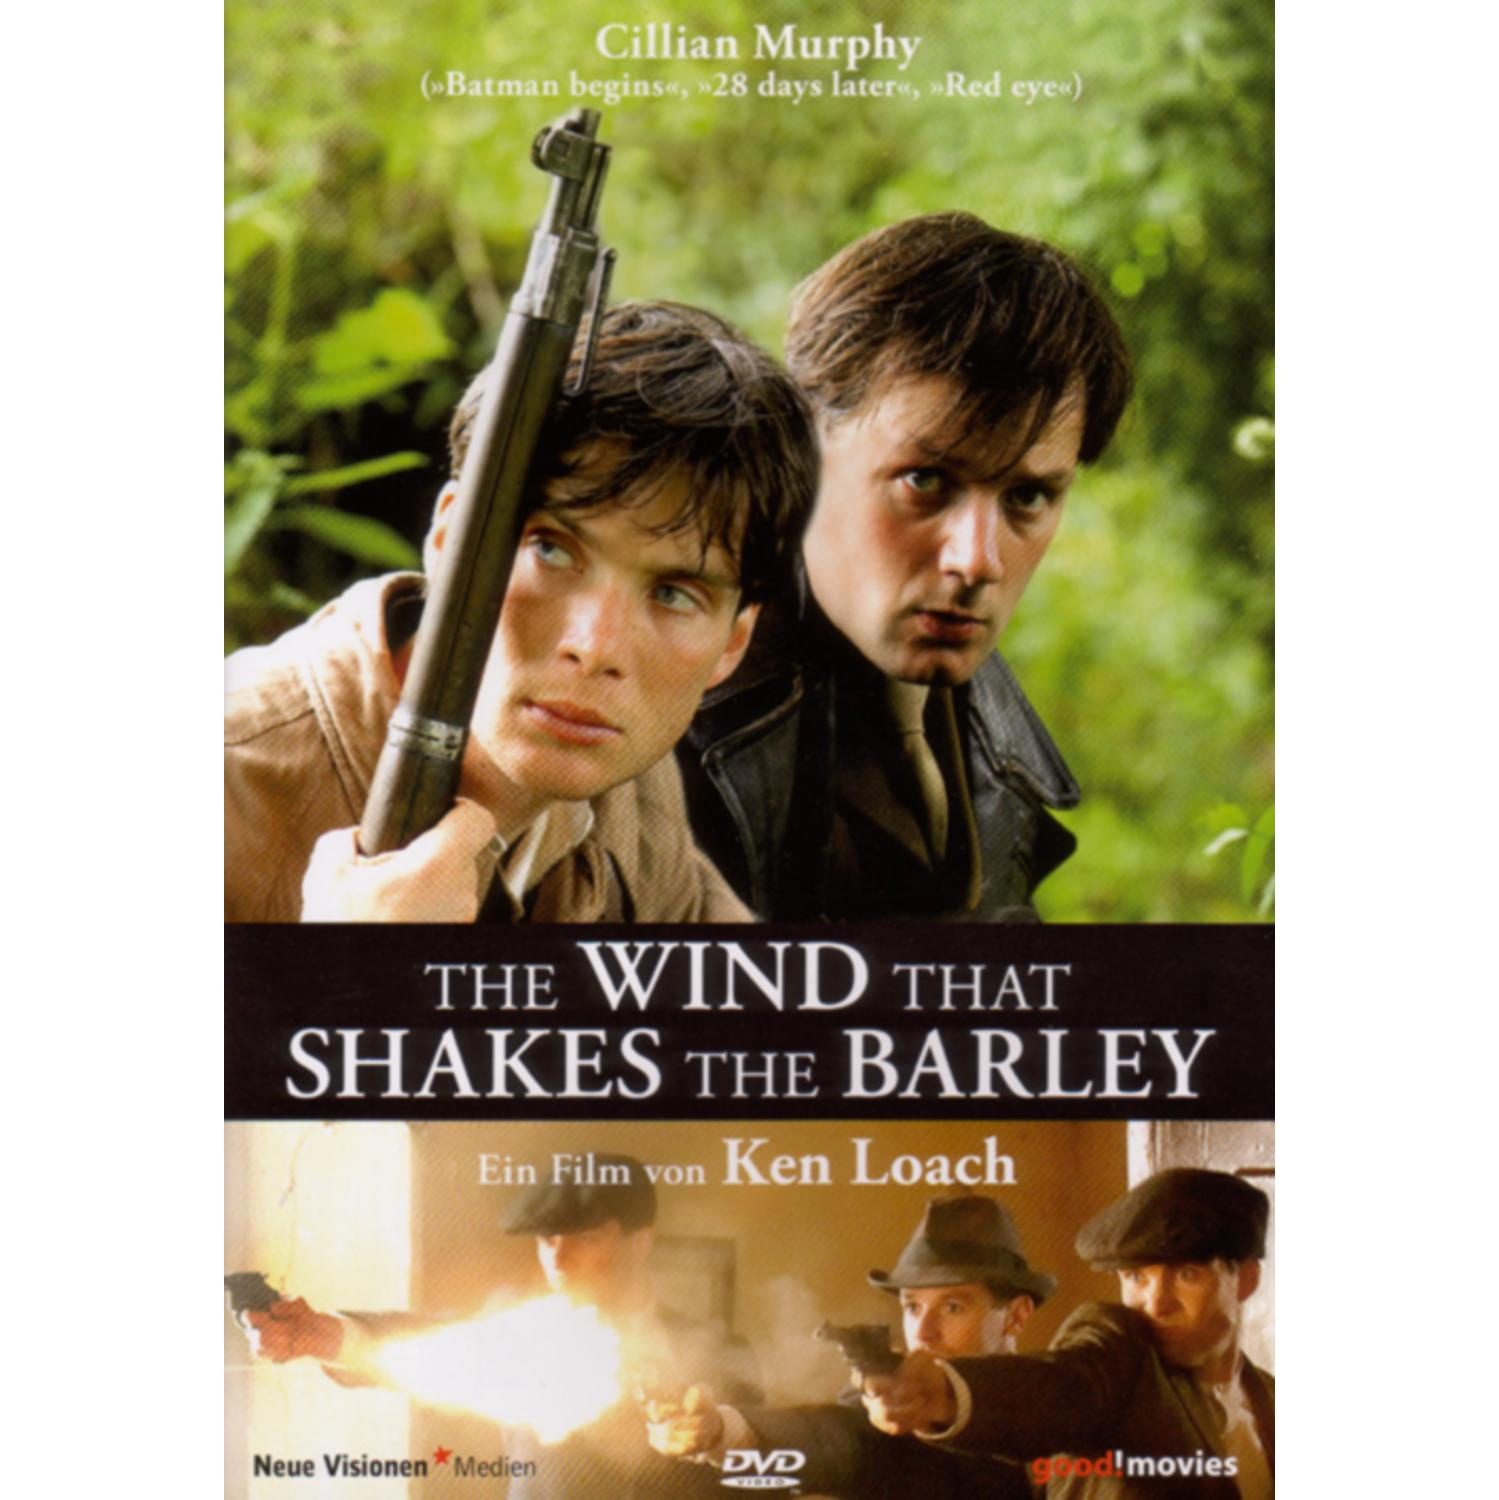 The Wind DVD Shakes the Barley that